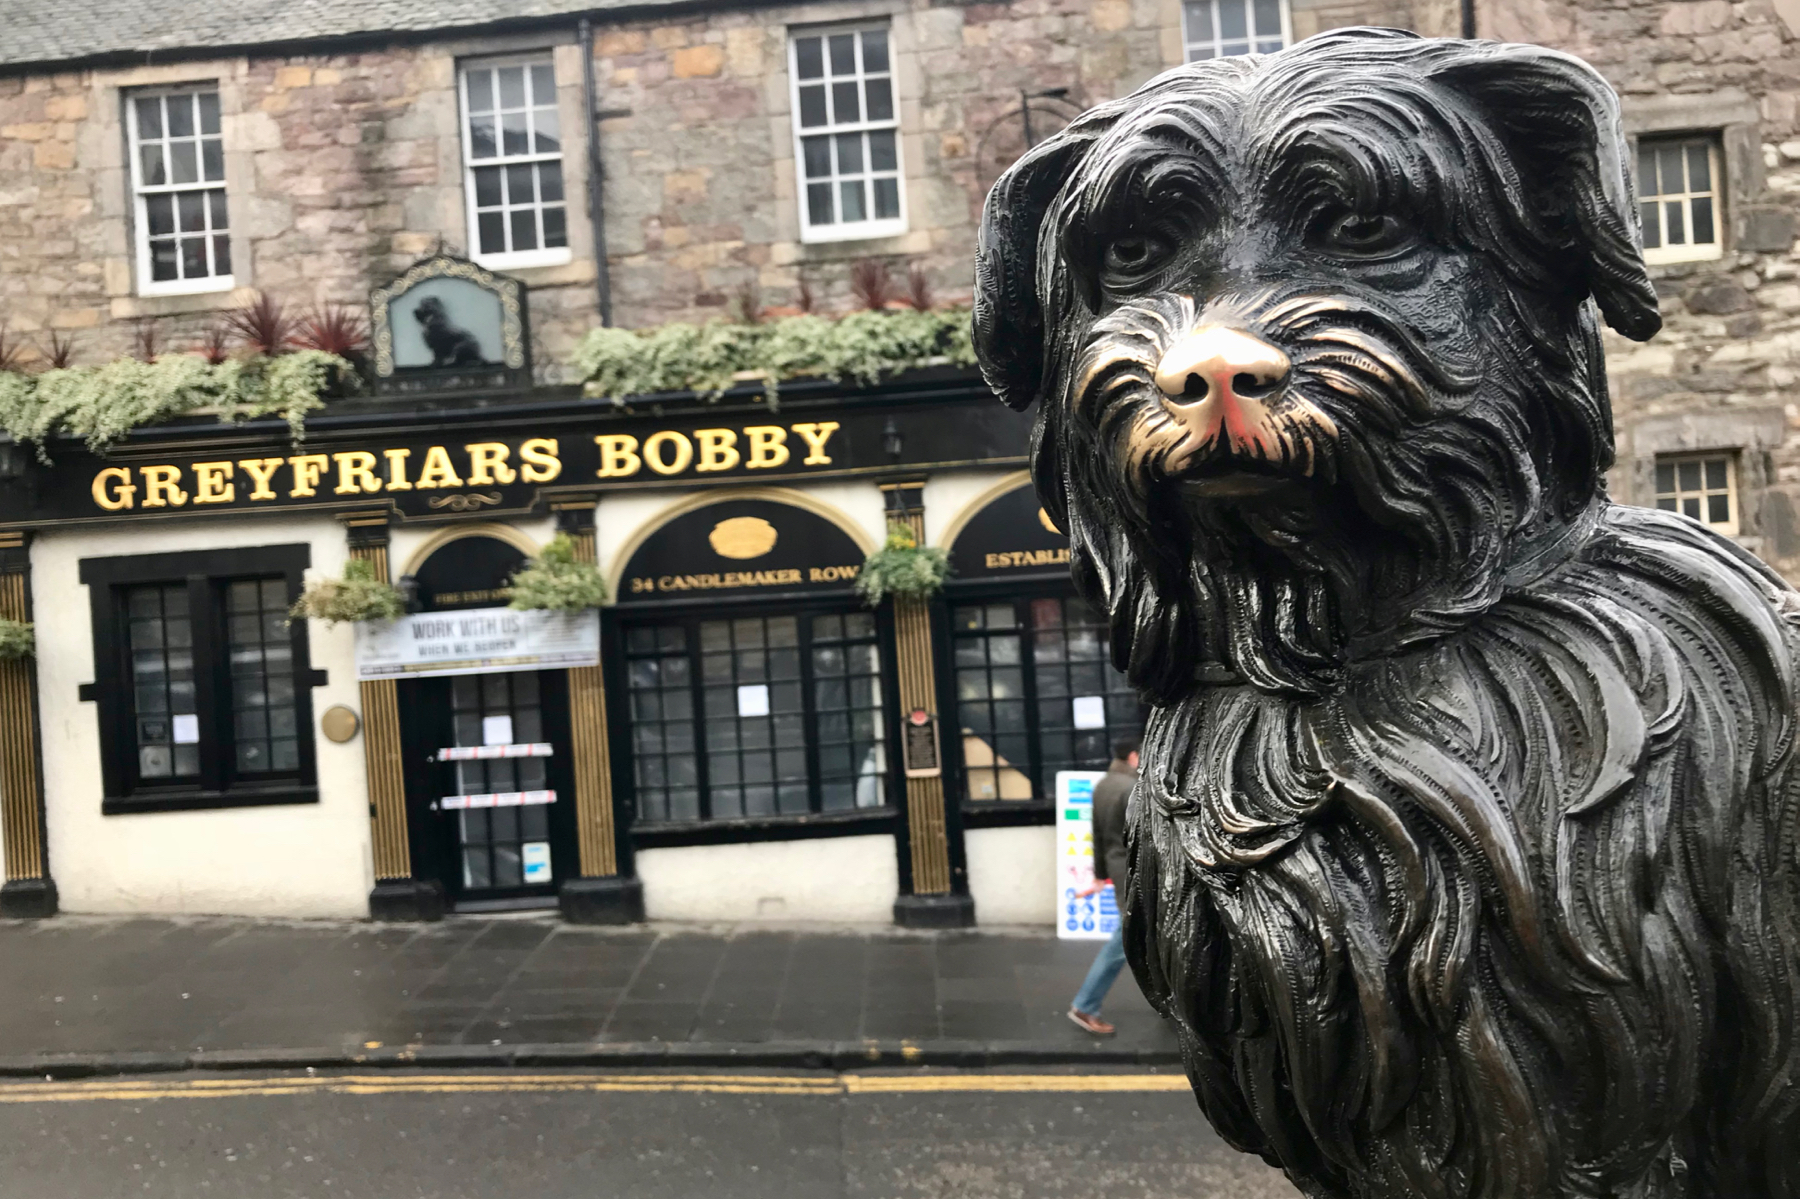 Greyfriars Bobby Memorial Statue with the Greyfriars Bobby Pub in the background